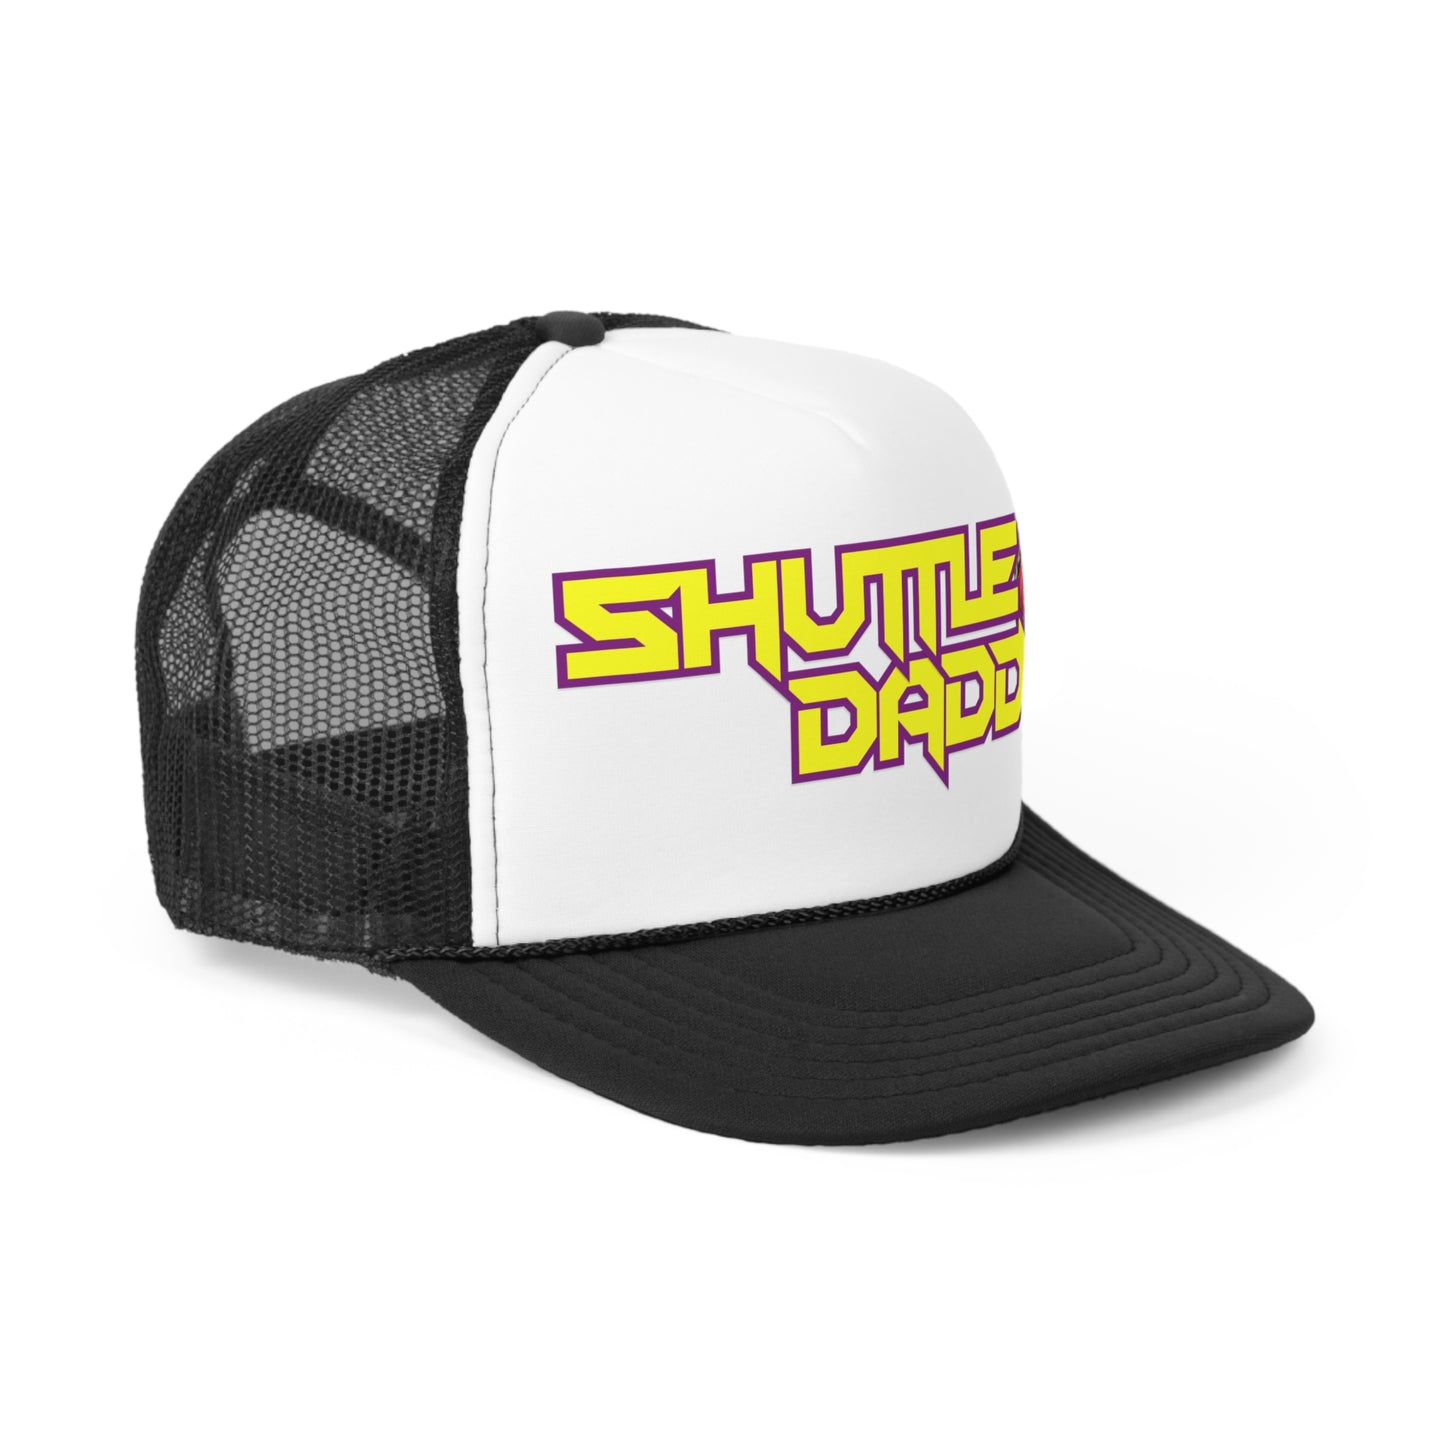 The perfect hat for your Shuttle Daddy